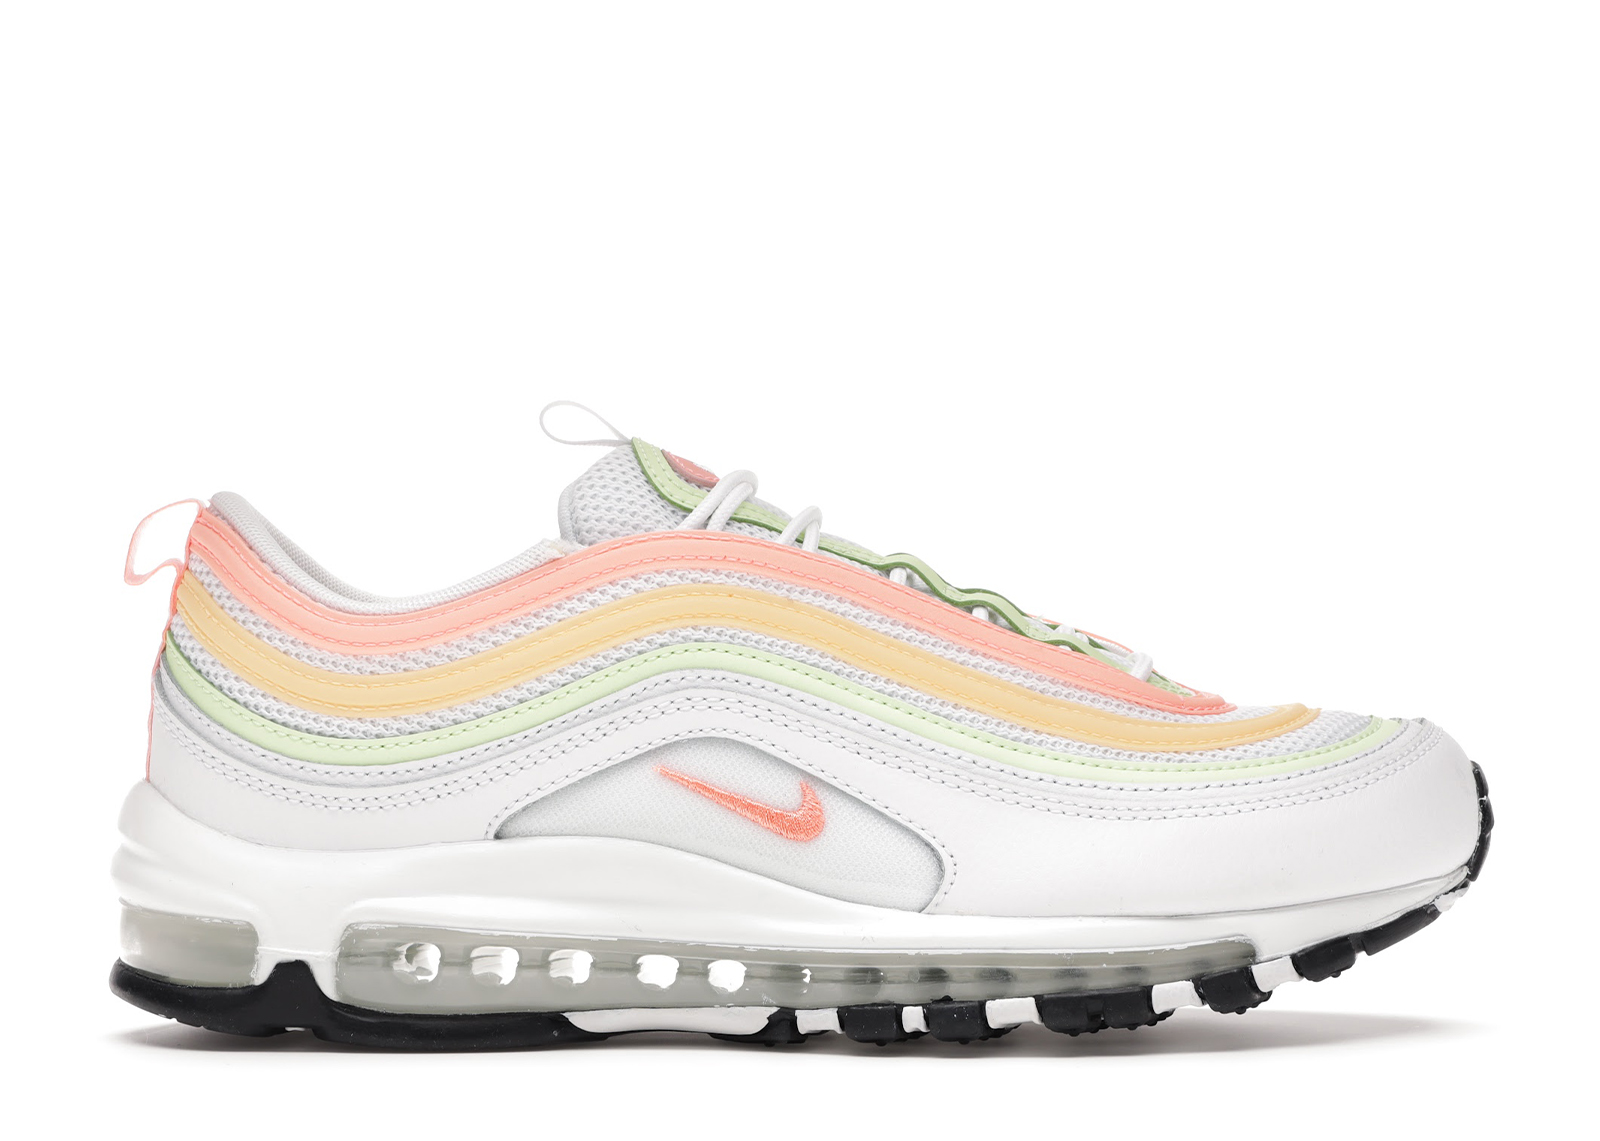 Nike Air Max 97 Melon Tint Barely Volt Atomic Pink (Women's 